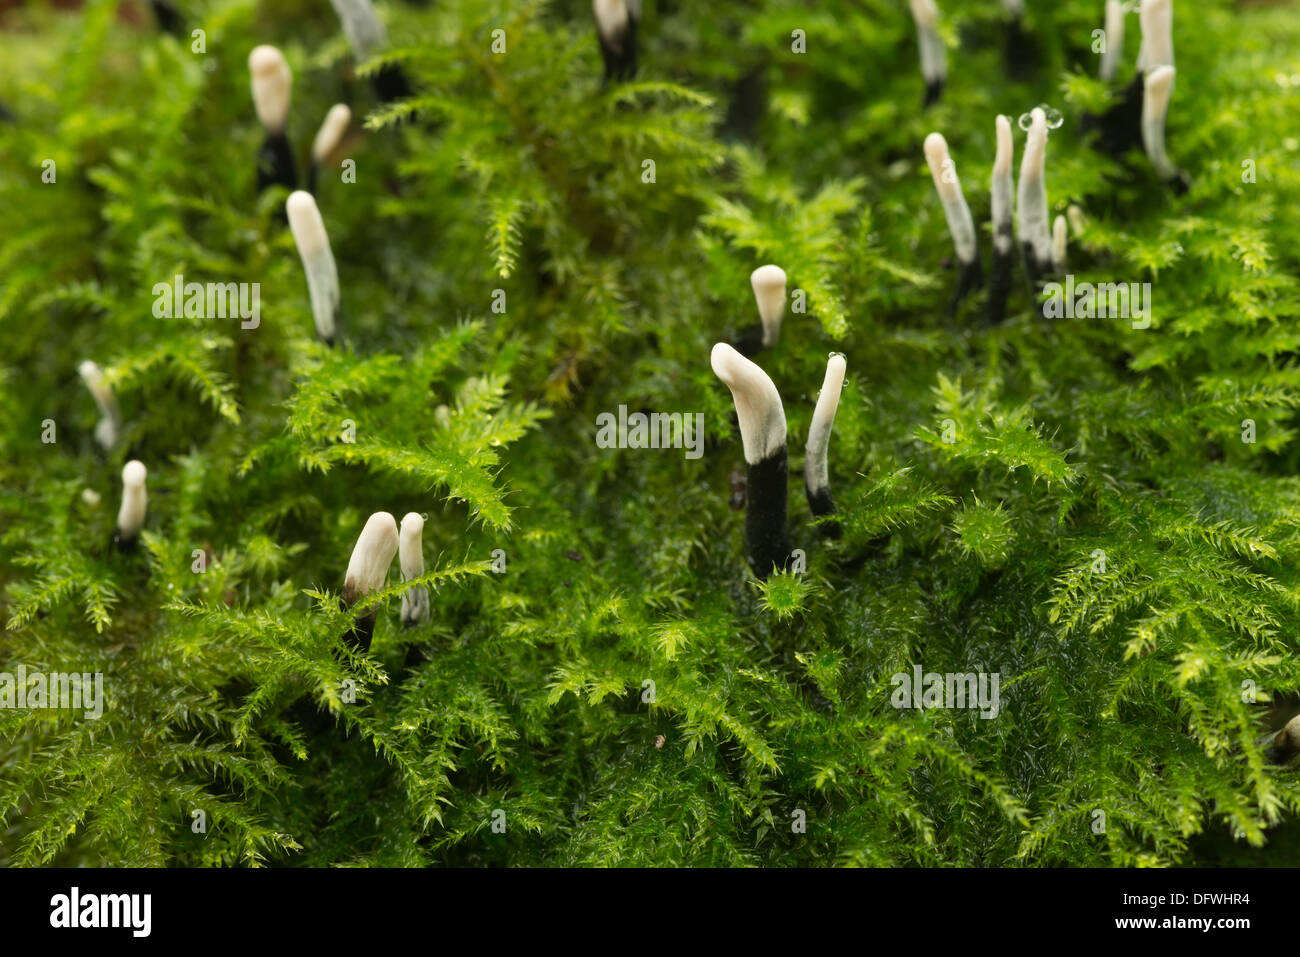 Miniature tiny Candle Snuff candlestick Fungus fruit bodies amongst creeping leaves branches shoots of moss Stock Photo